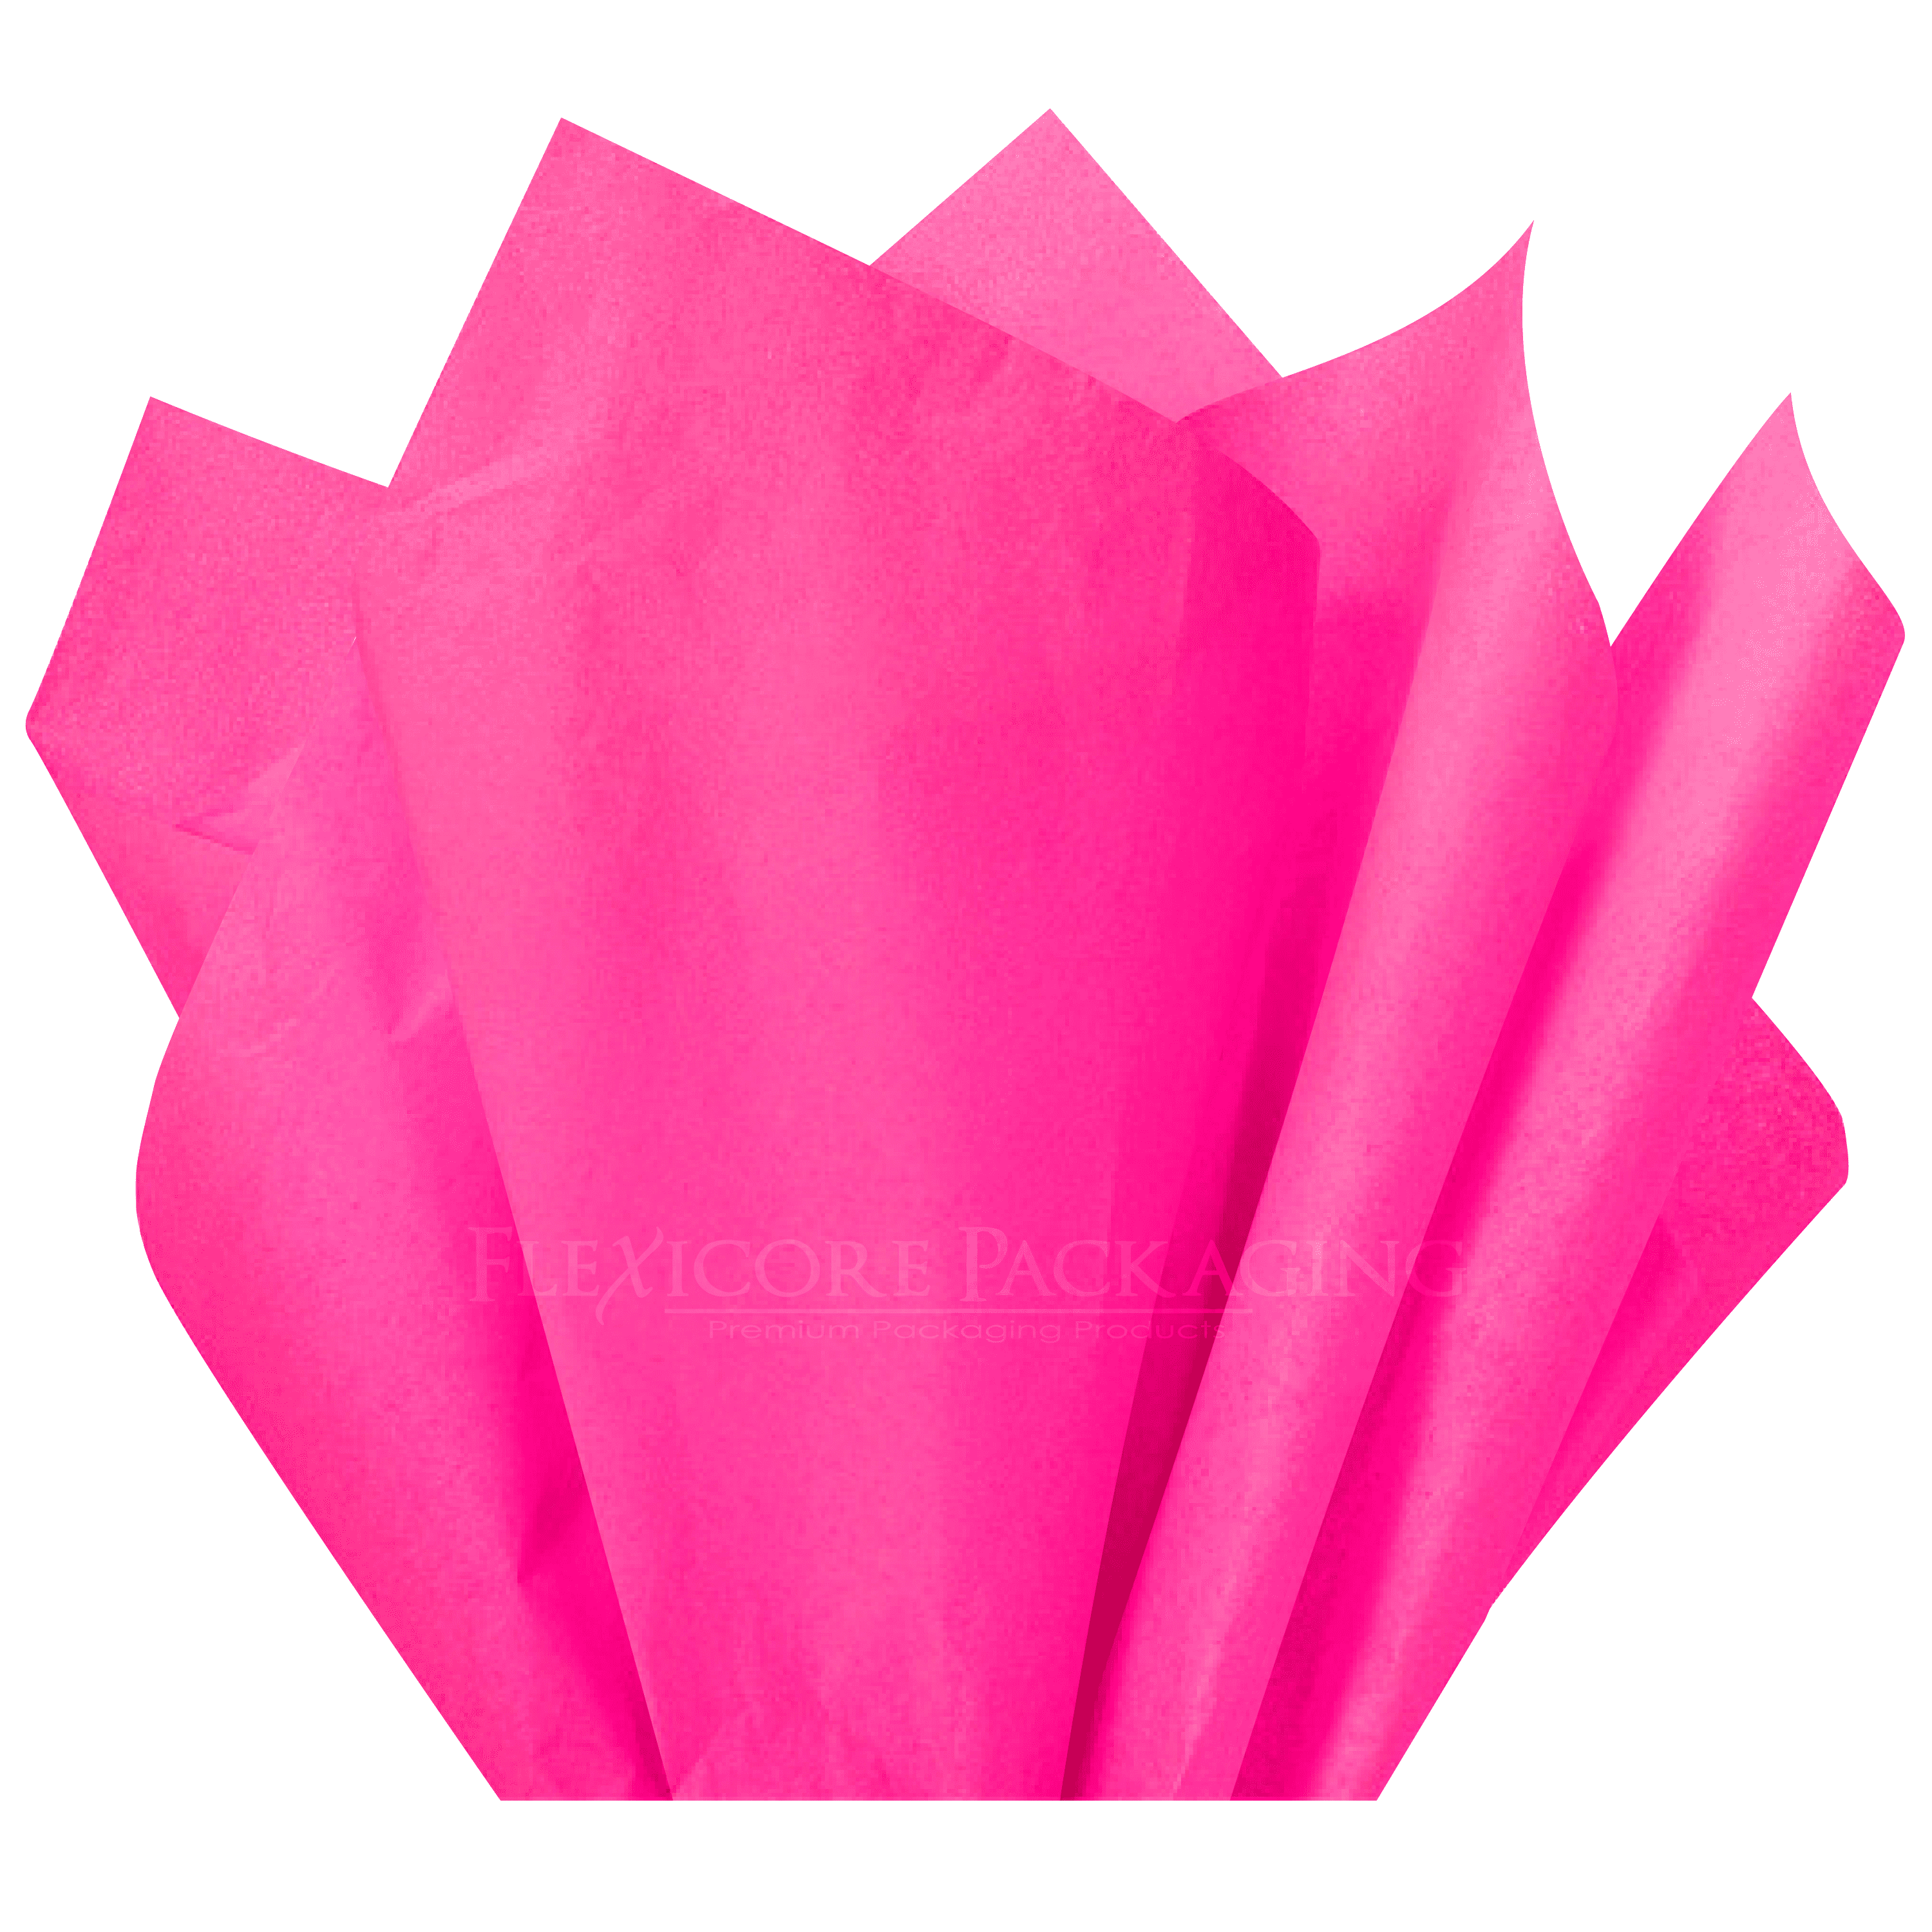  RUSPEPA Gift Wrapping Tissue Paper - Hot Pink Tissue